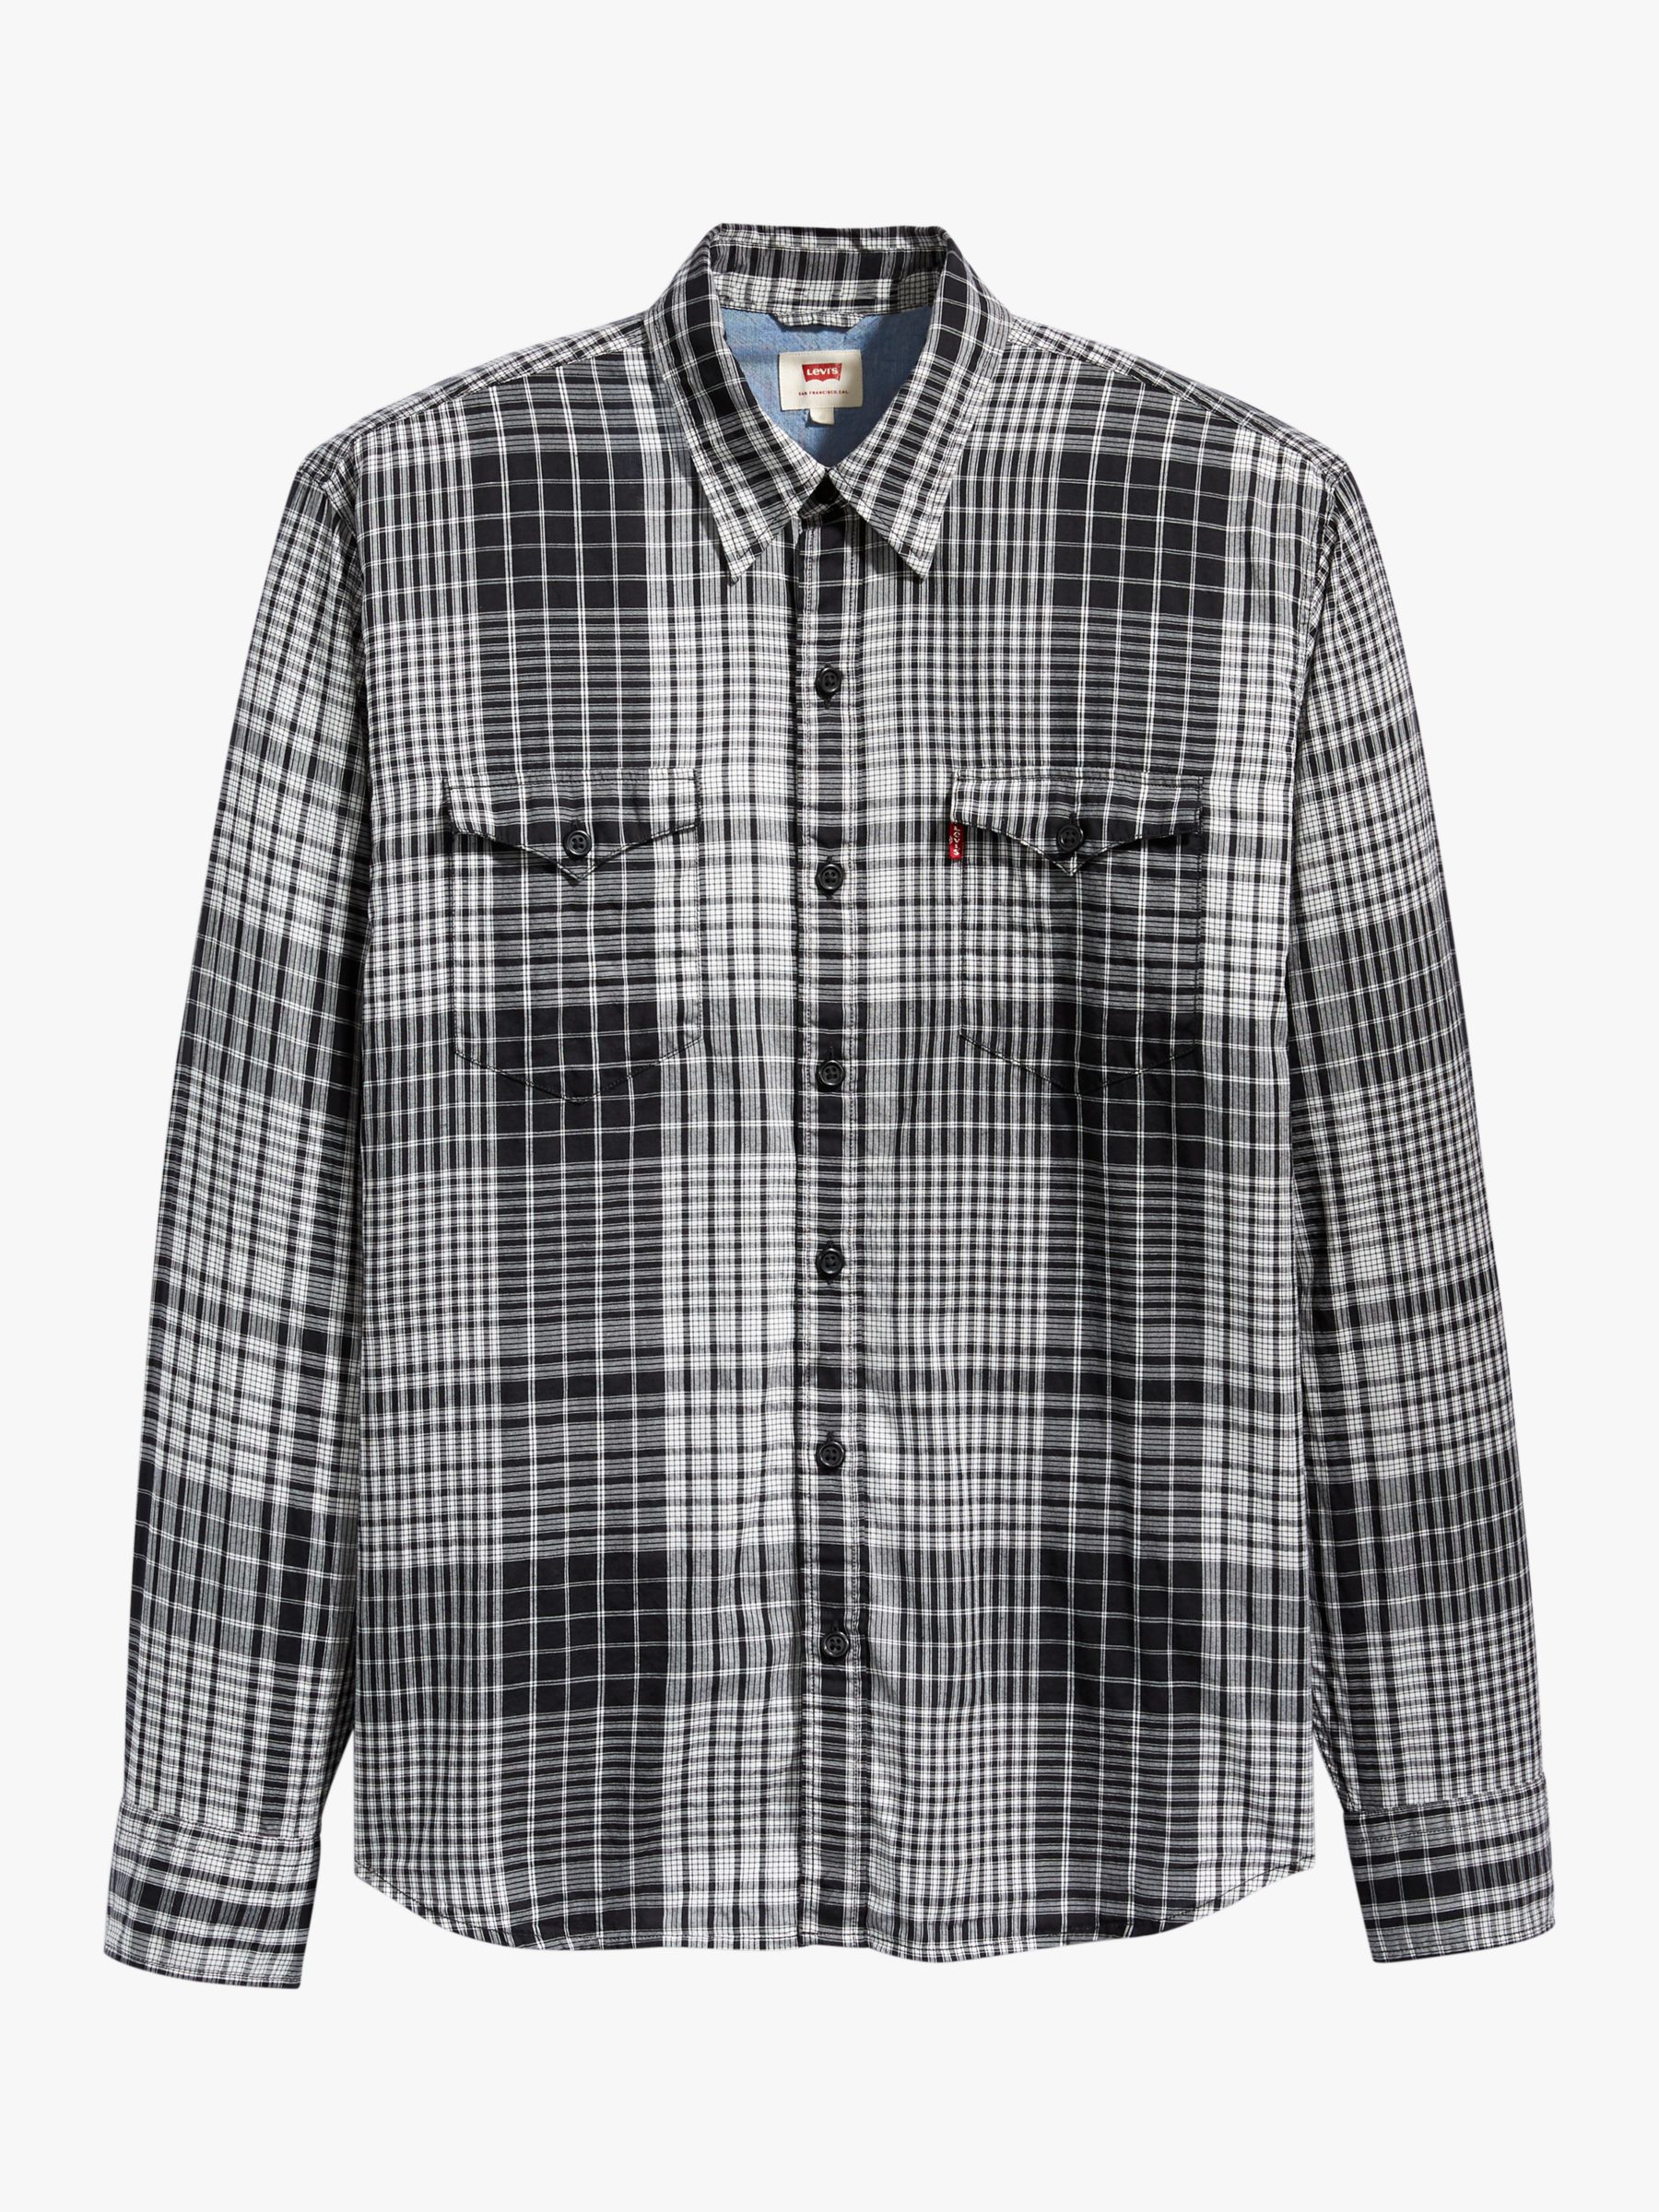 Levi's Barstow Western Check Shirt at 